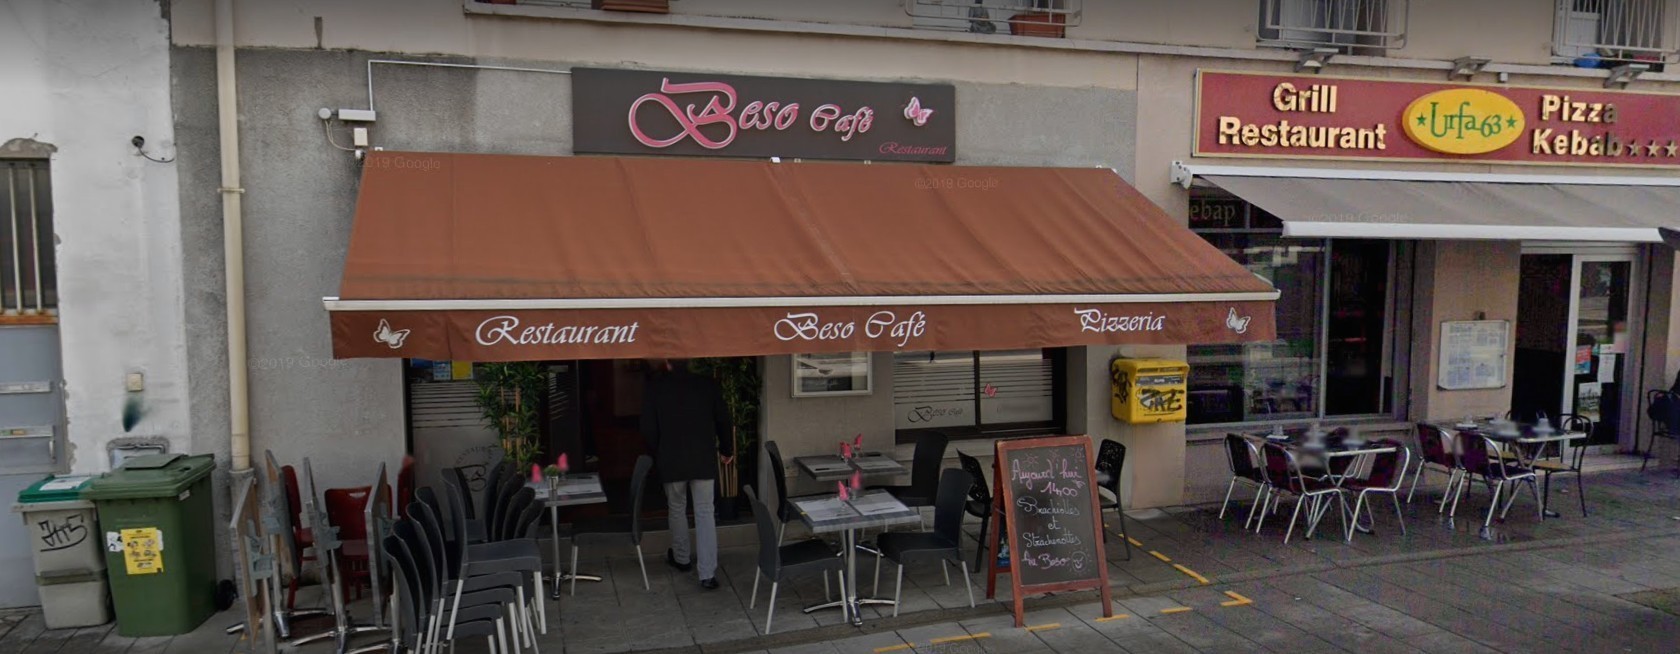 Boutique LE BESO CAFE - Grenoble Shopping